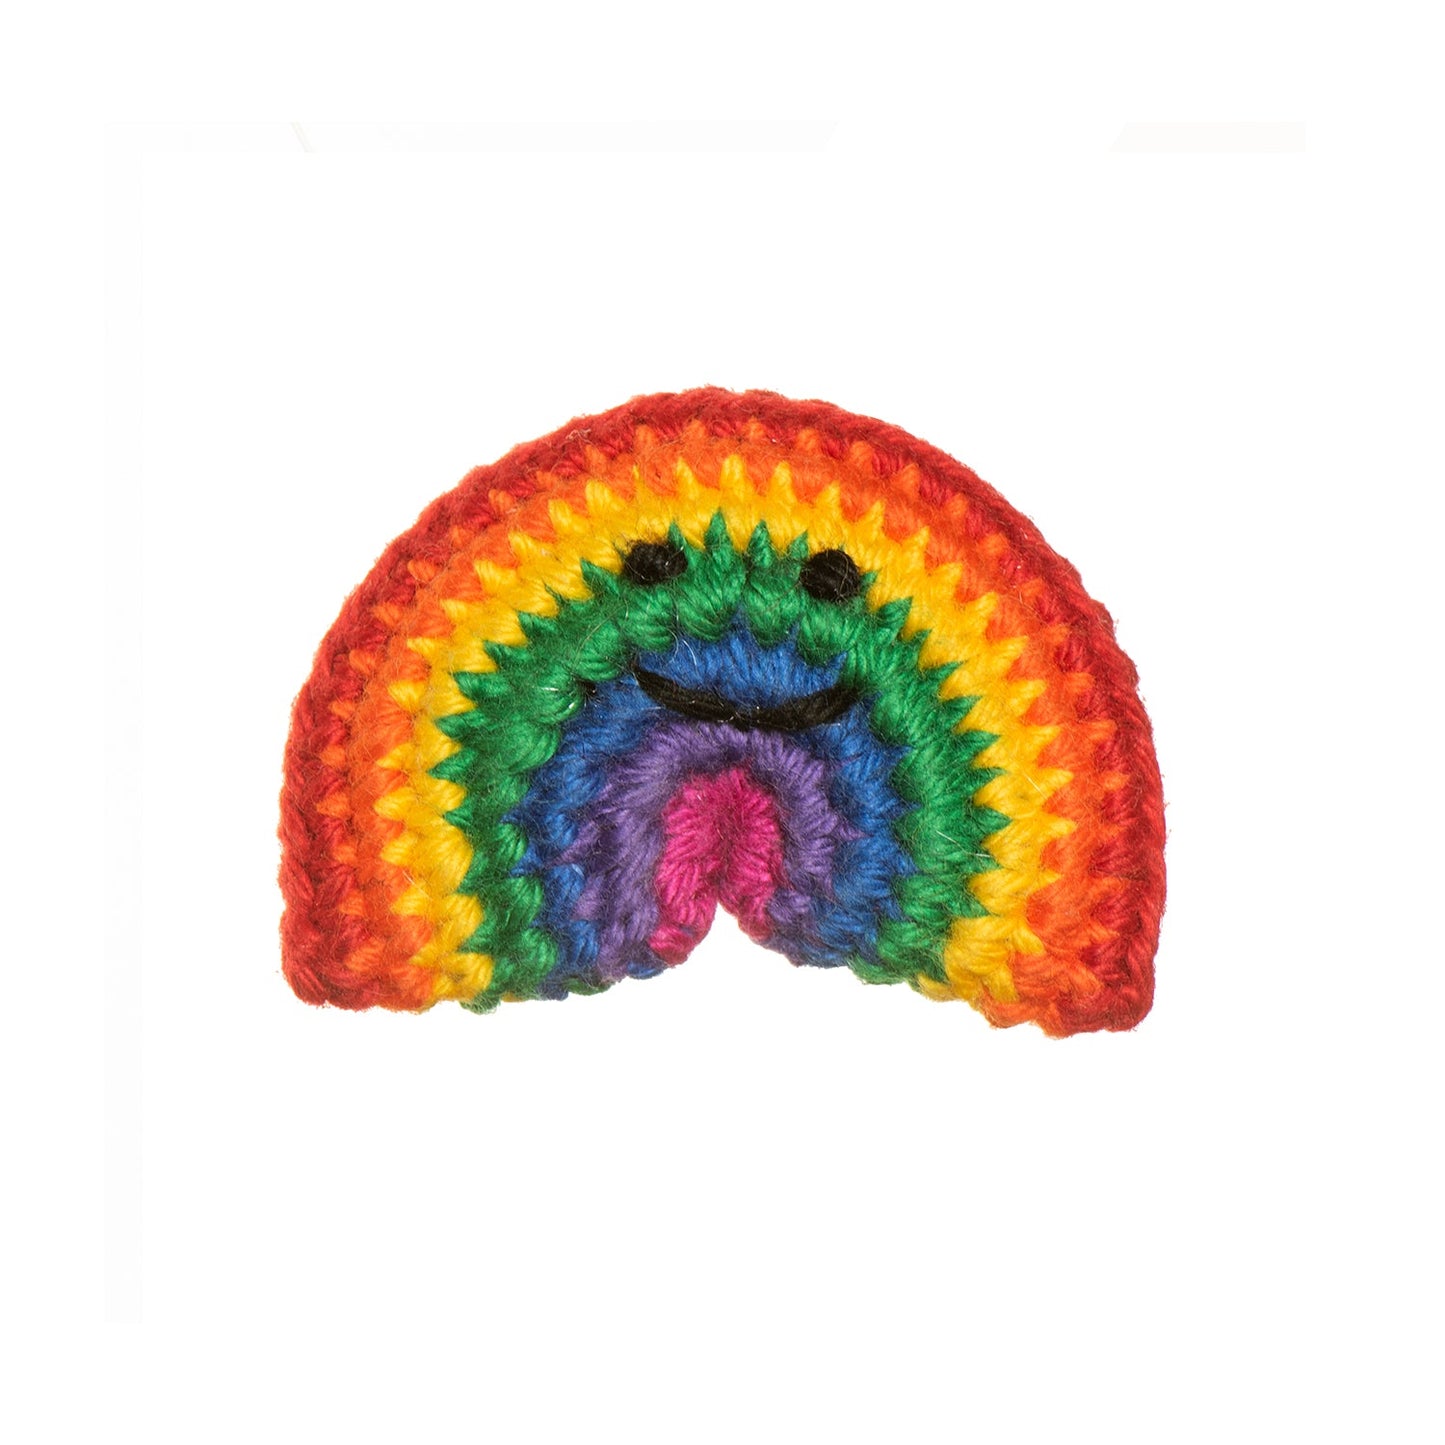 Load image into Gallery viewer, Crochet rainbow brooch with a little smiley face in black thread.
